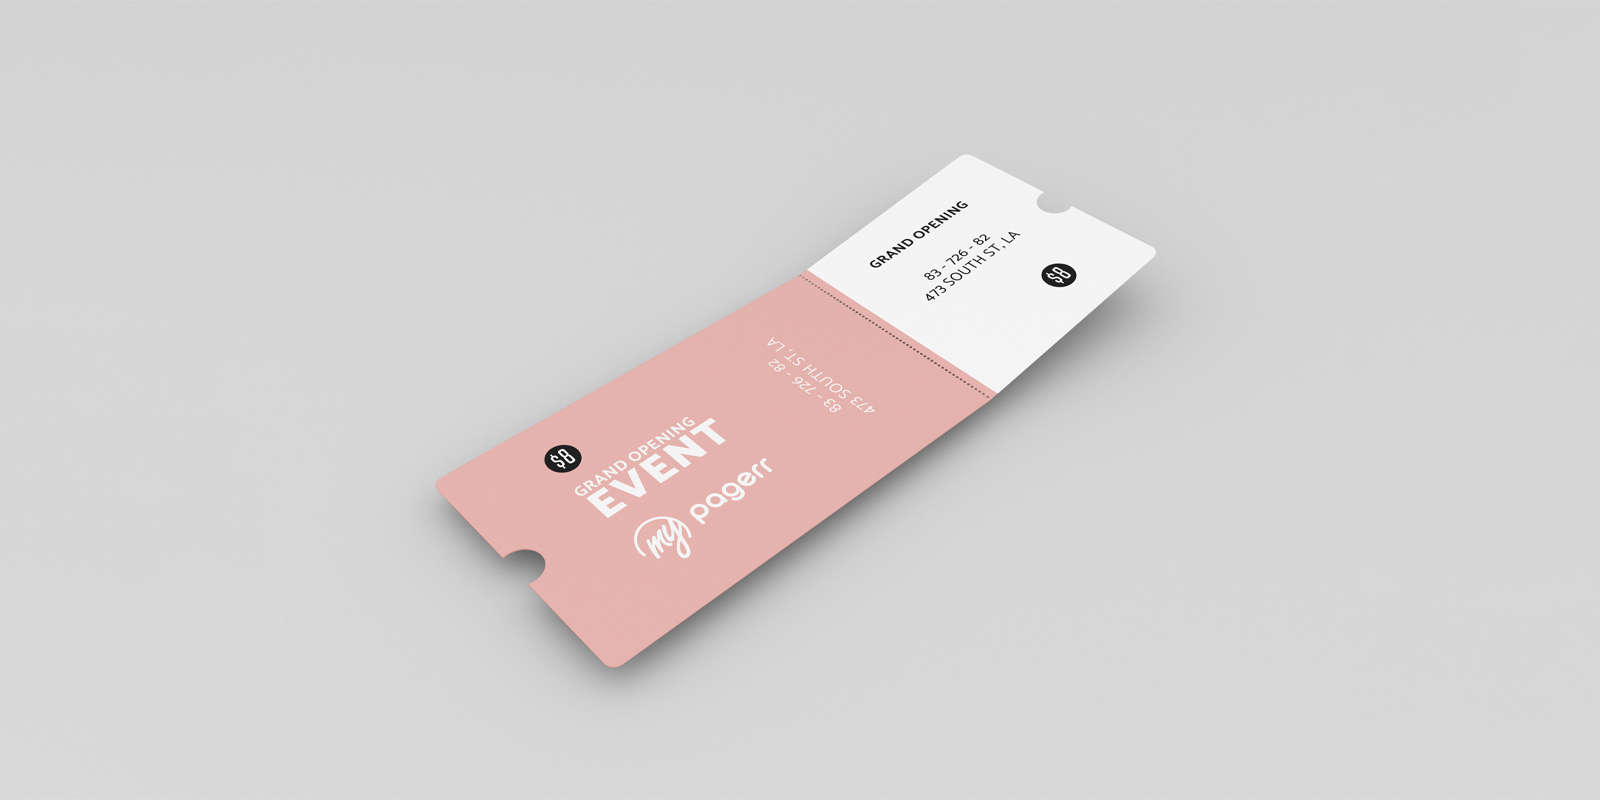 Tickets in Berlin - Print with Pagerr